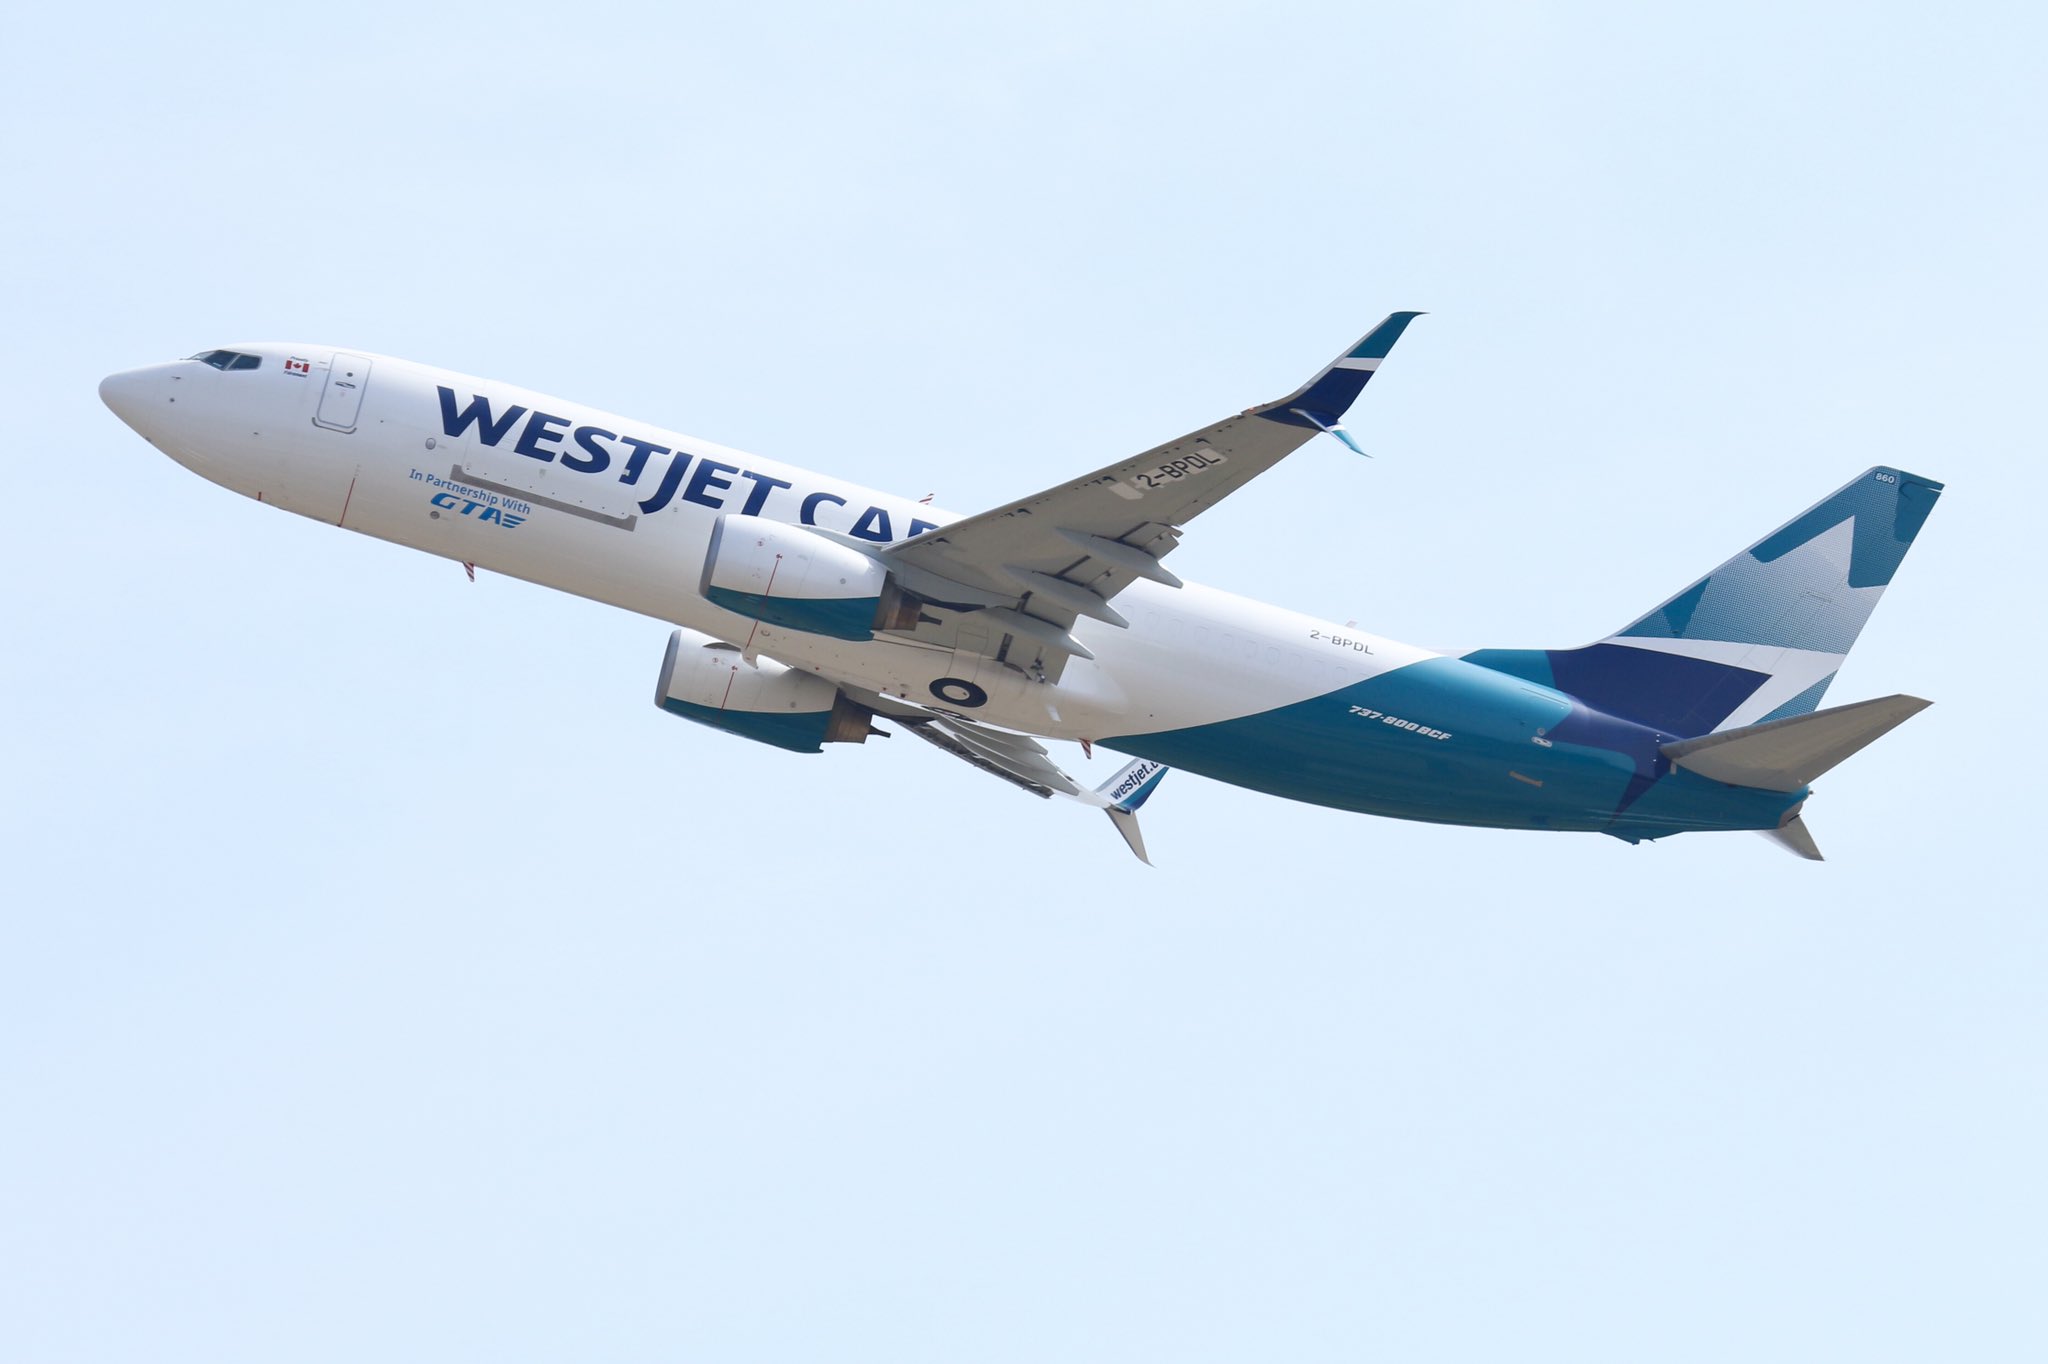 WestJet to launch 737 freighter flights on 22 April, News